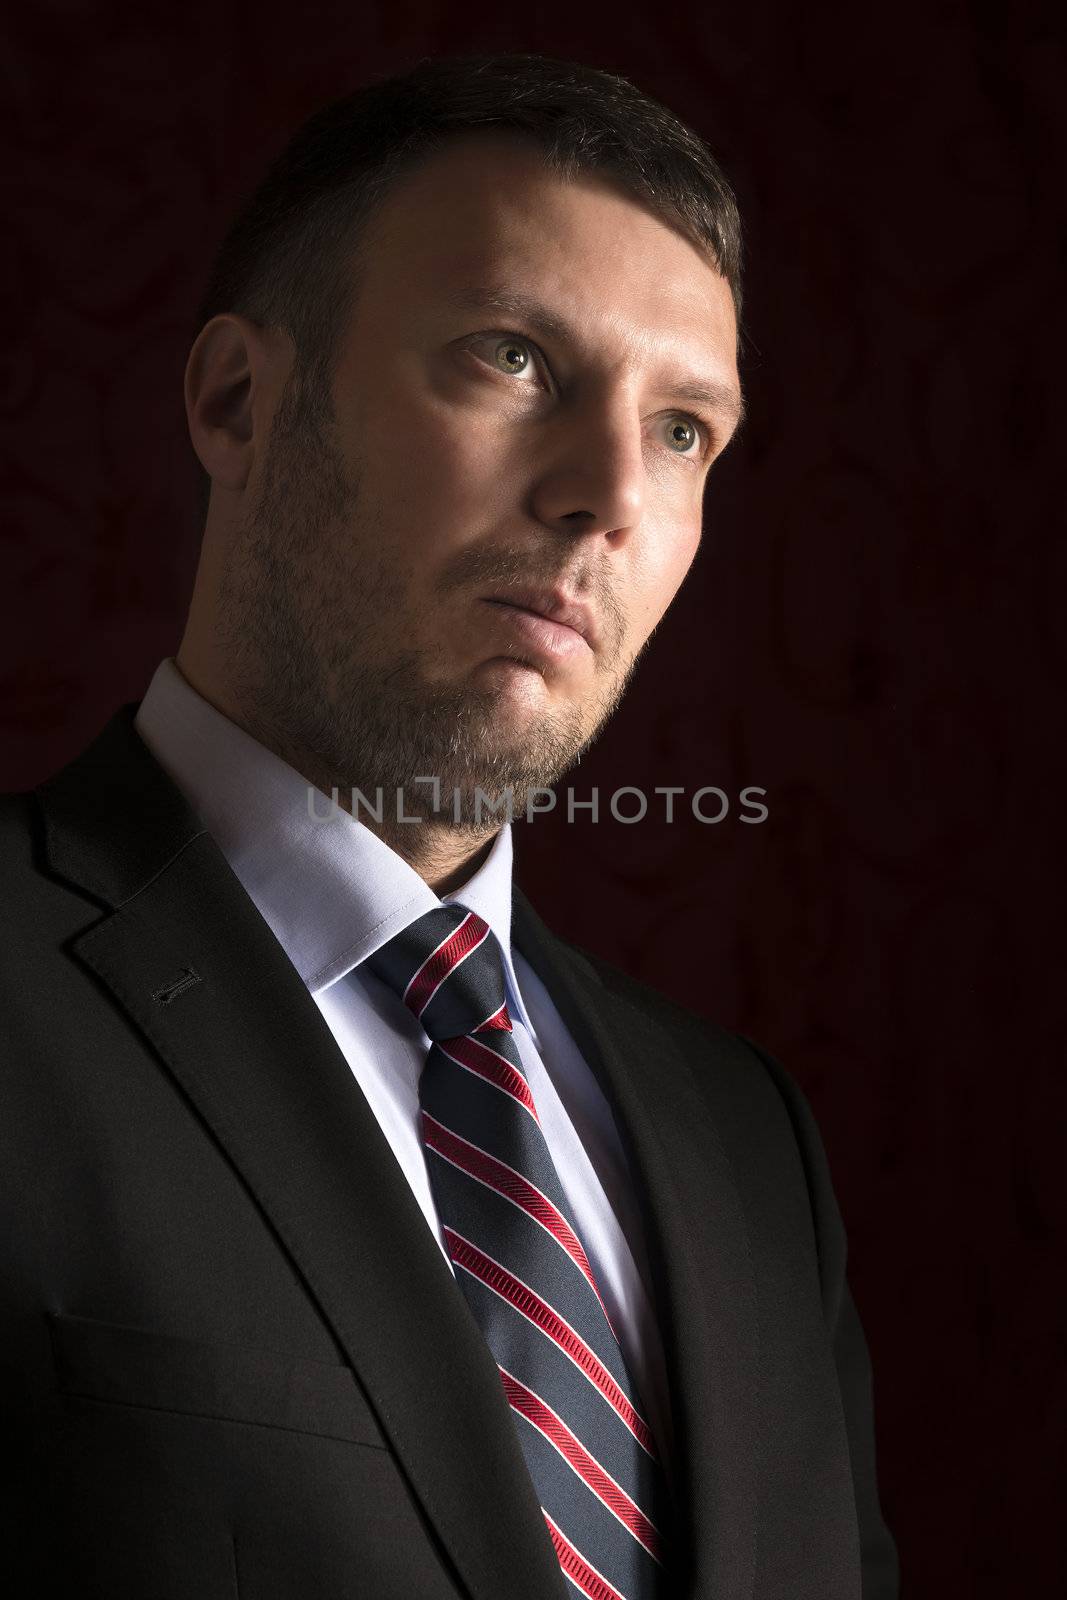 Portrait of a powerful, legant man with suit and tie